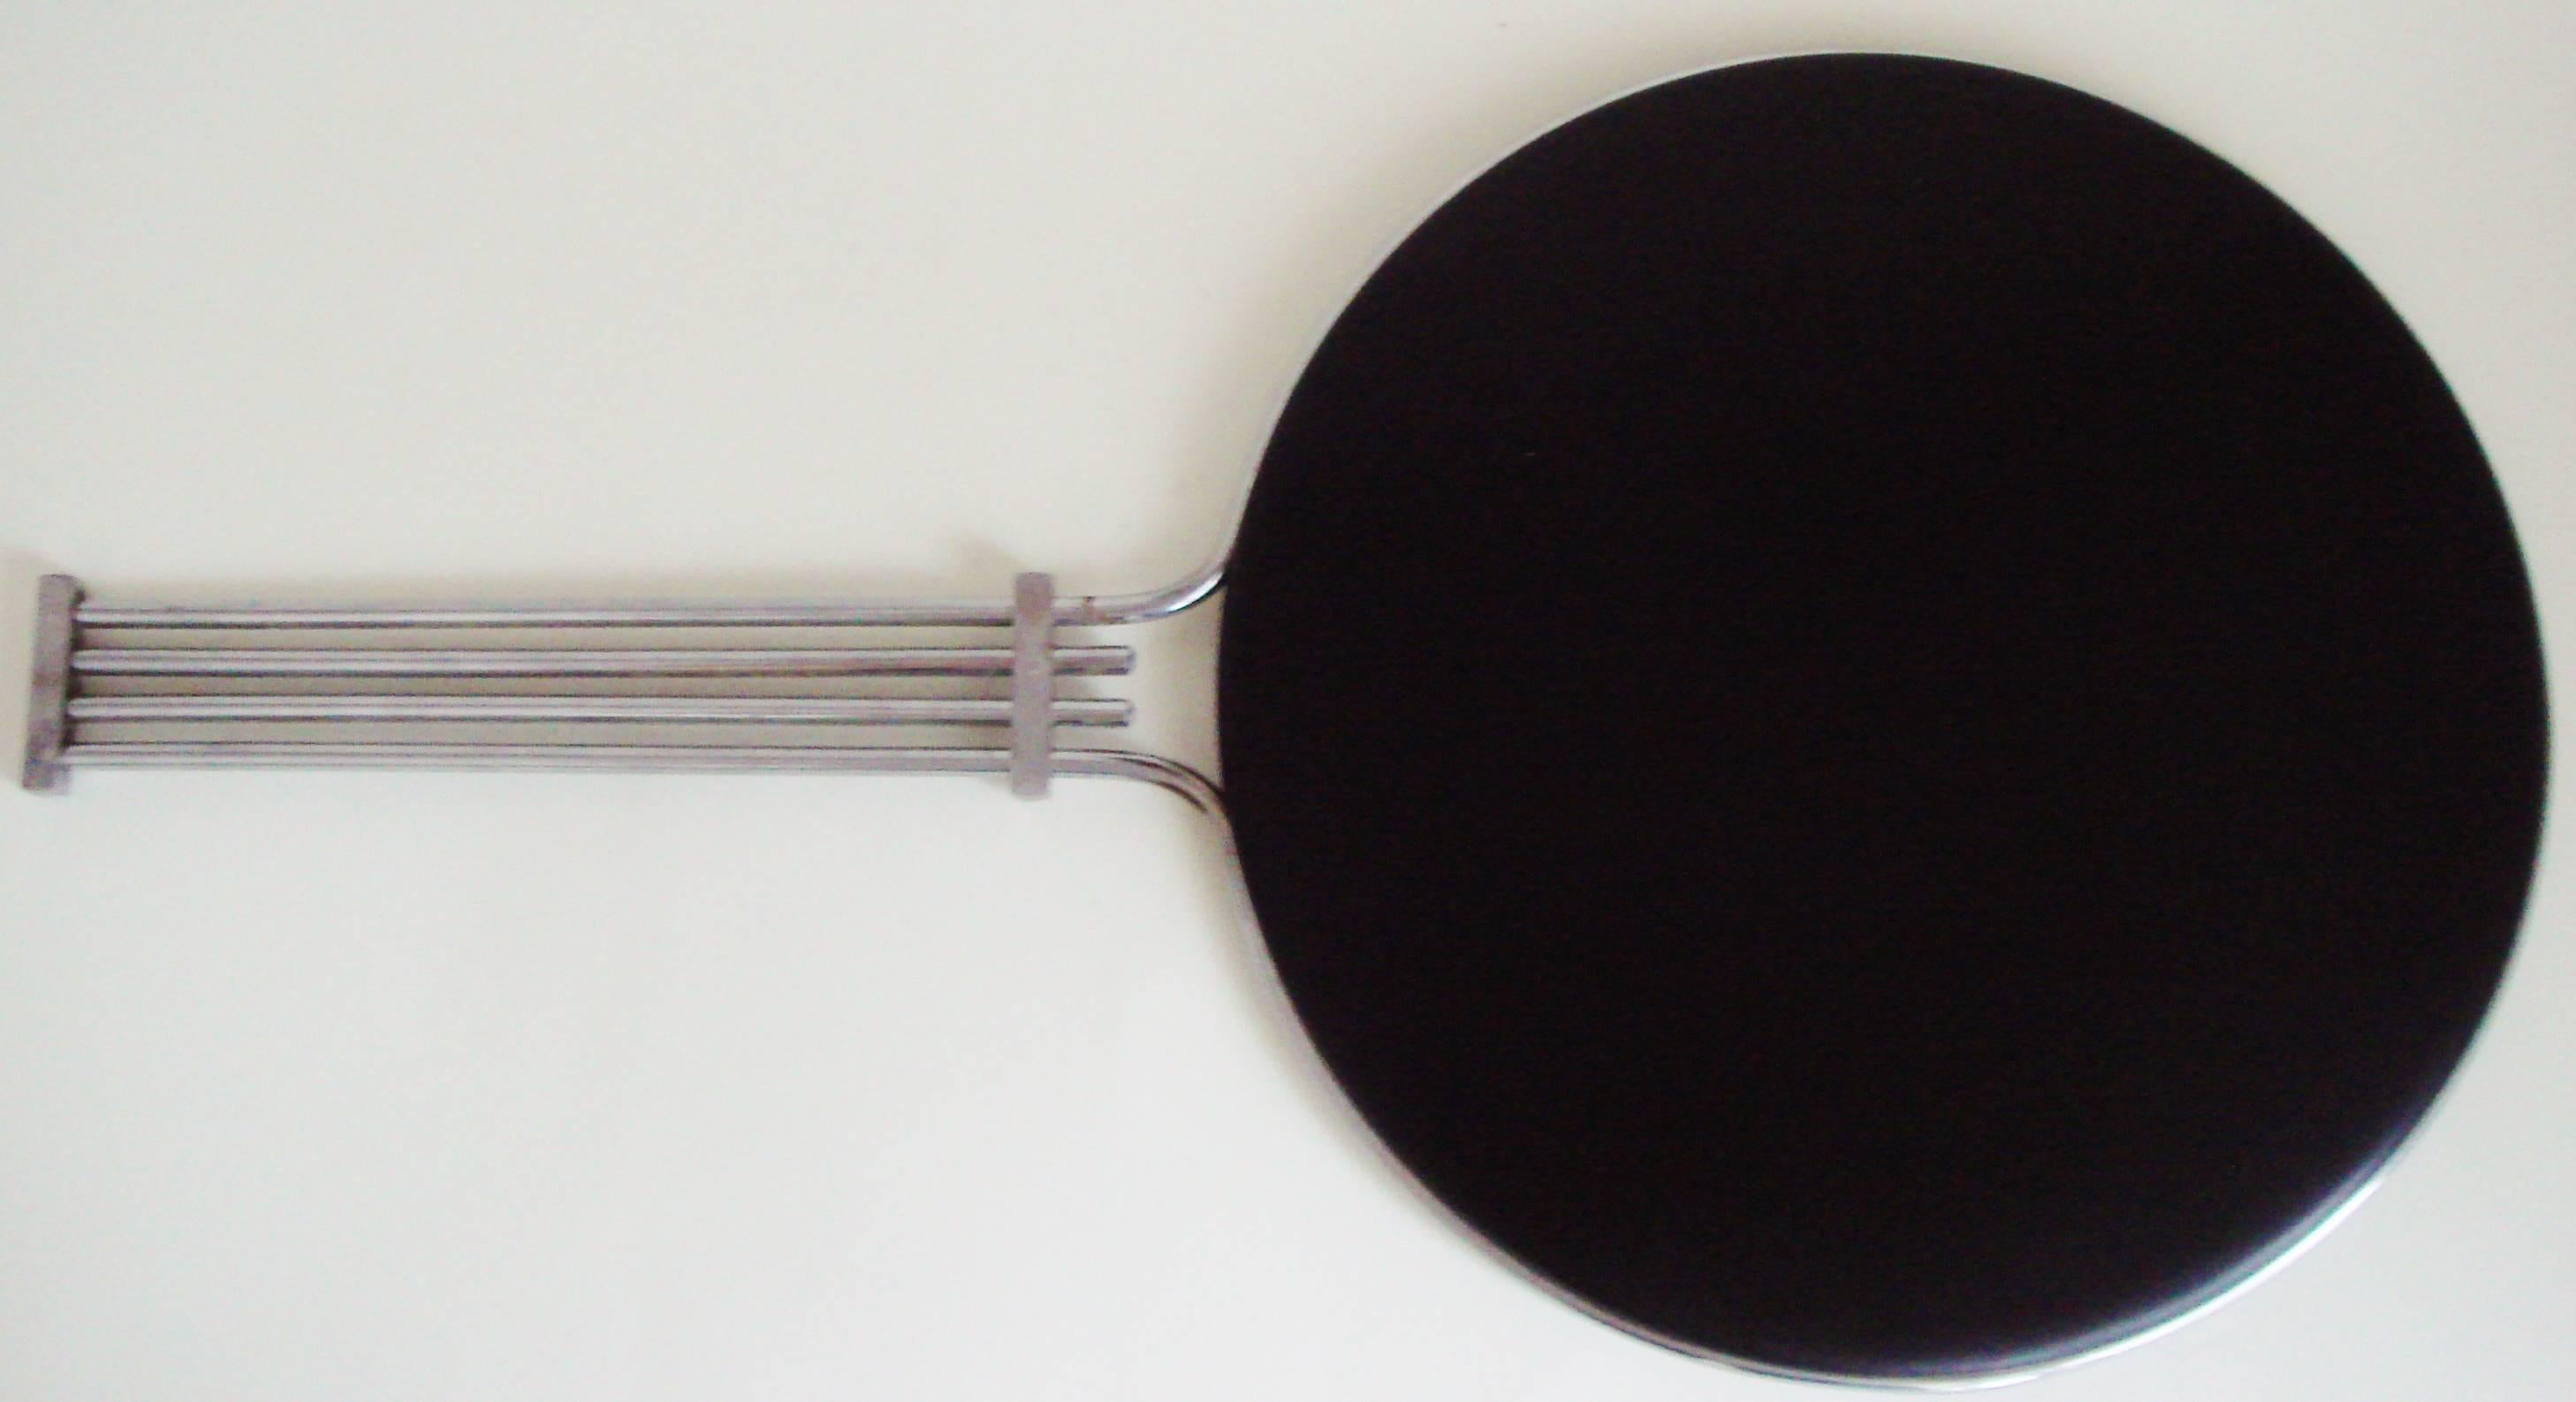 This magnificent, large American Art Deco chrome and black lacquered wood hand mirror is from a department store haberdashery department. These mirrors were used in order that Madame could 